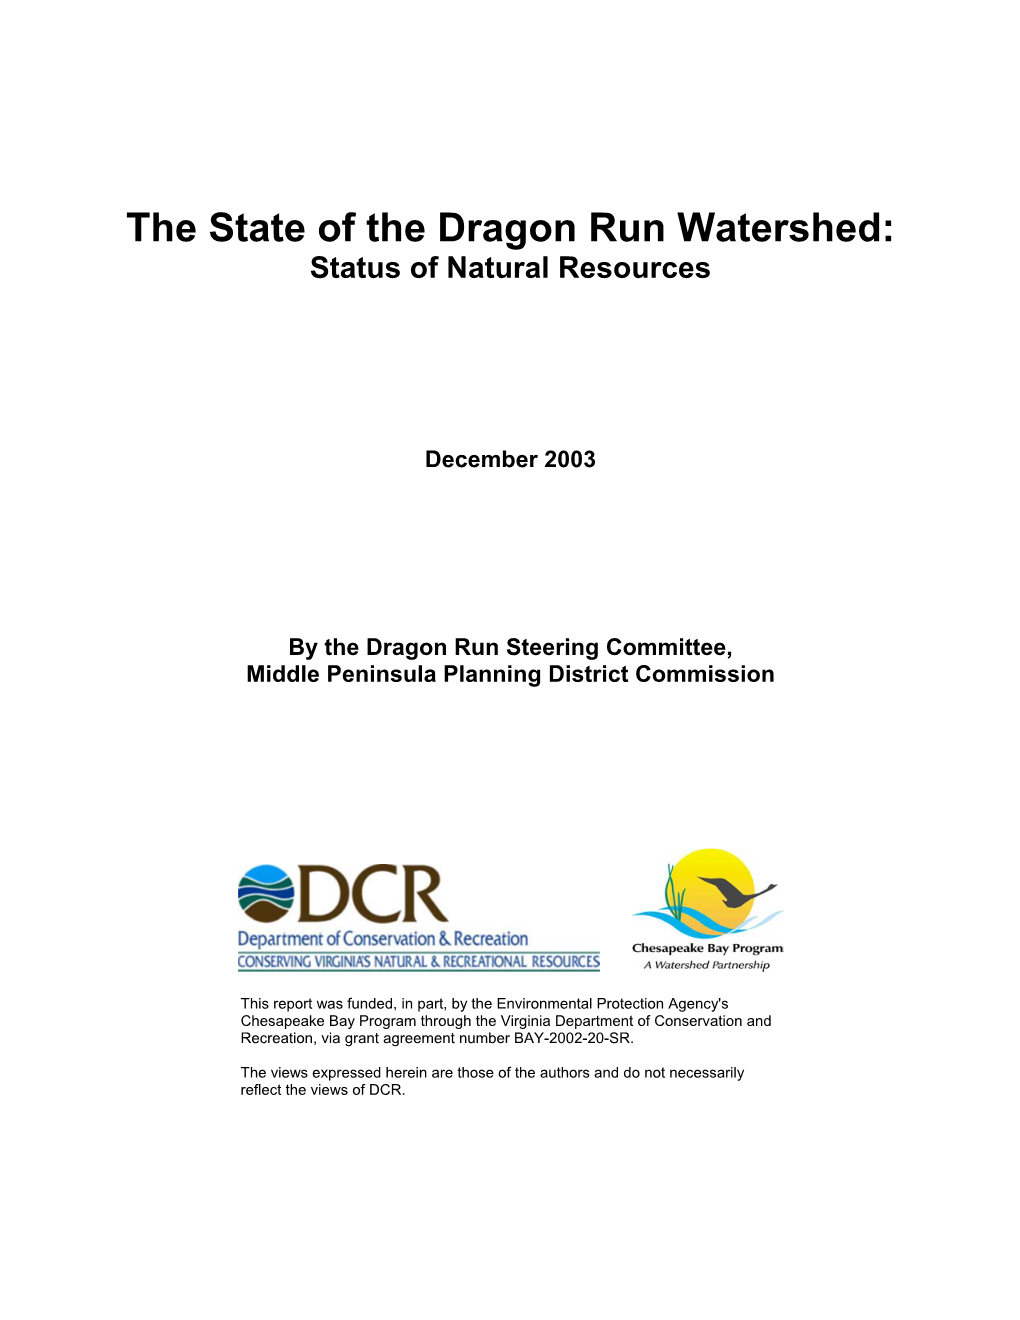 The State of the Dragon Run Watershed: Status of Natural Resources